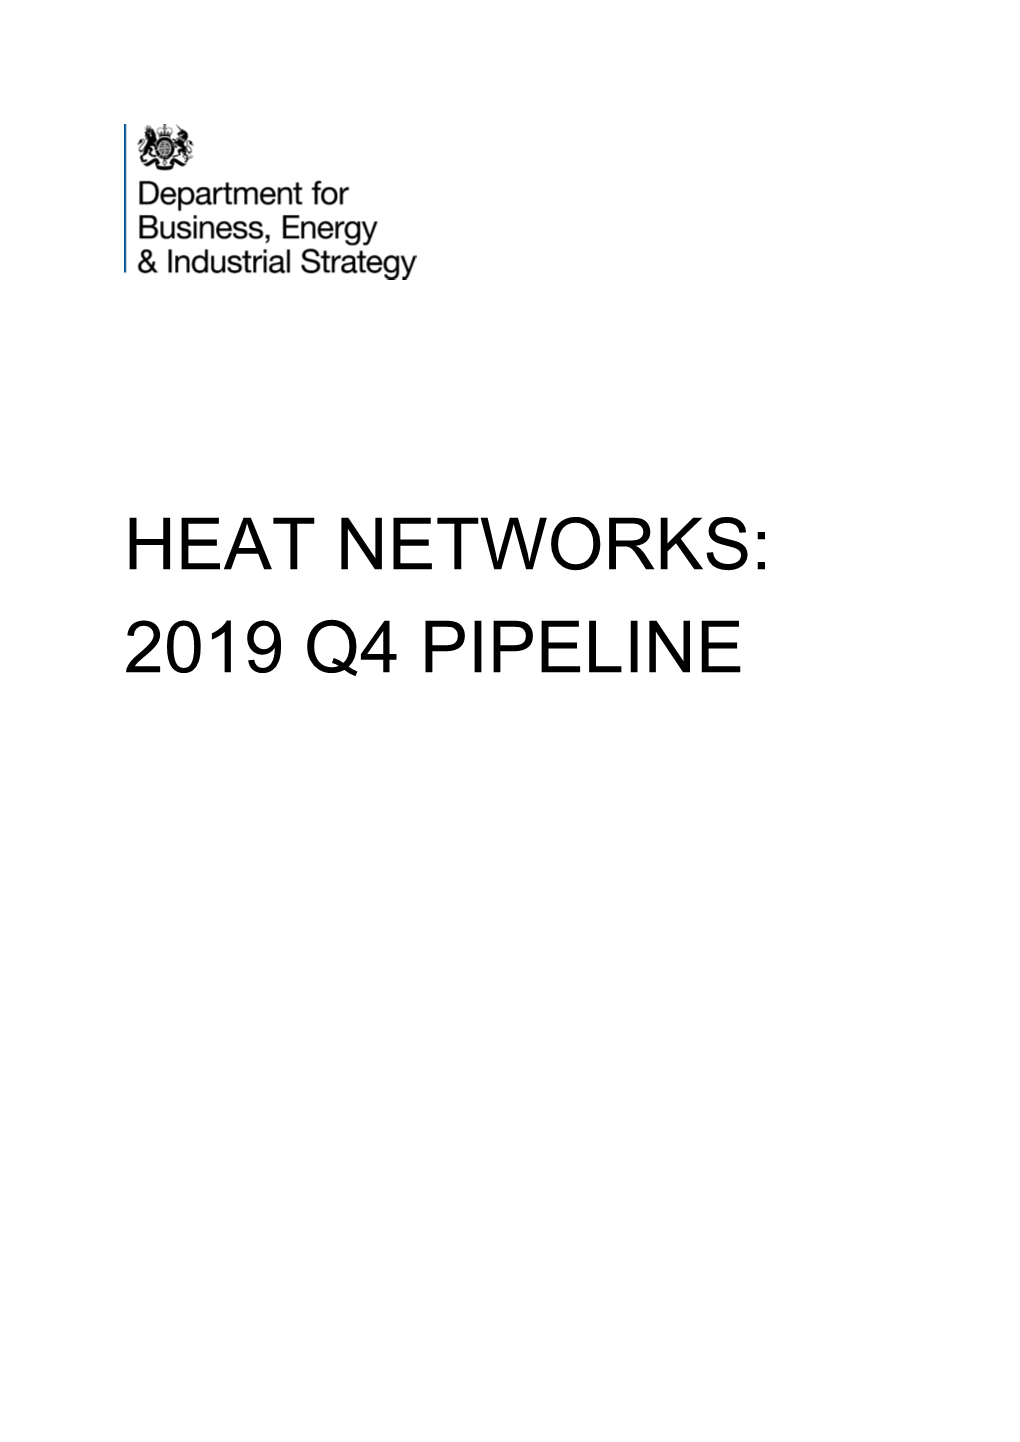 Heat Networks Project Pipeline October to December 2019